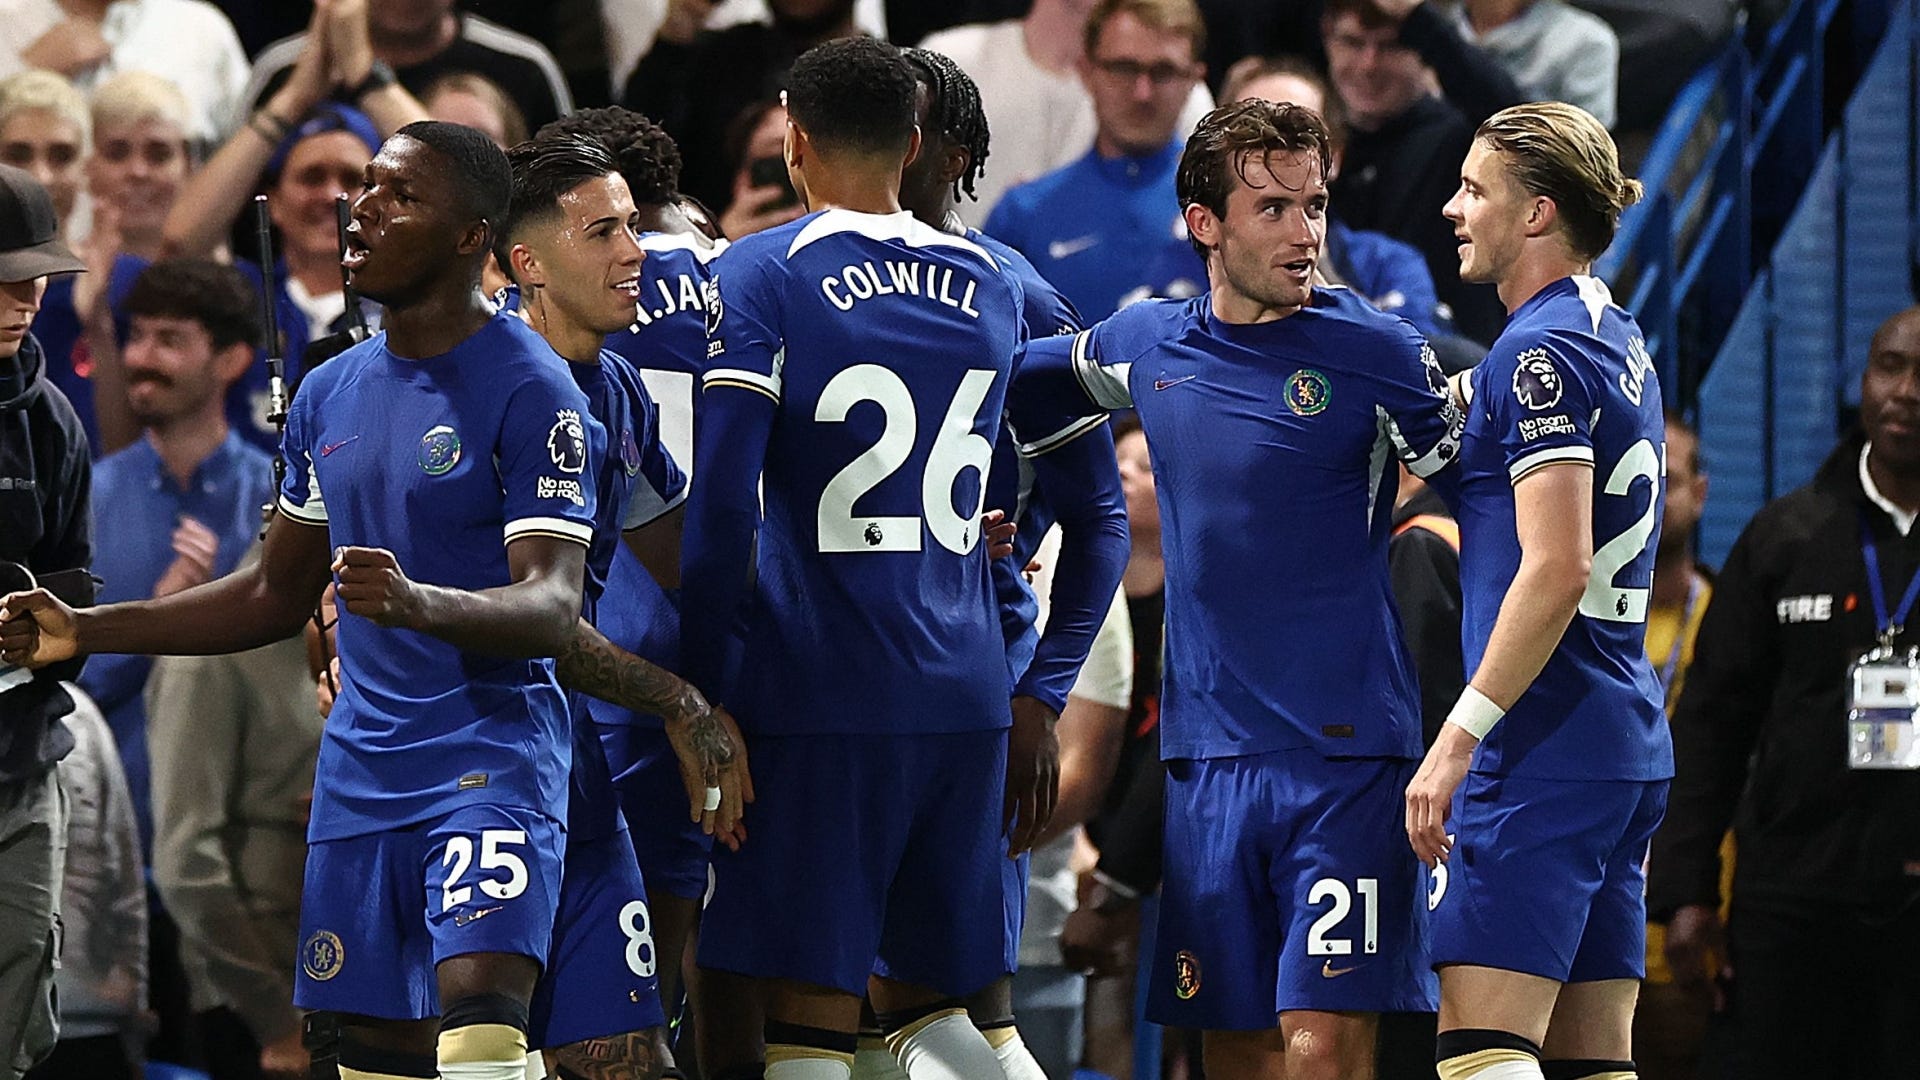 Chelsea vs Wimbledon Live stream, TV channel, kick-off time and where to watch Goal Nigeria